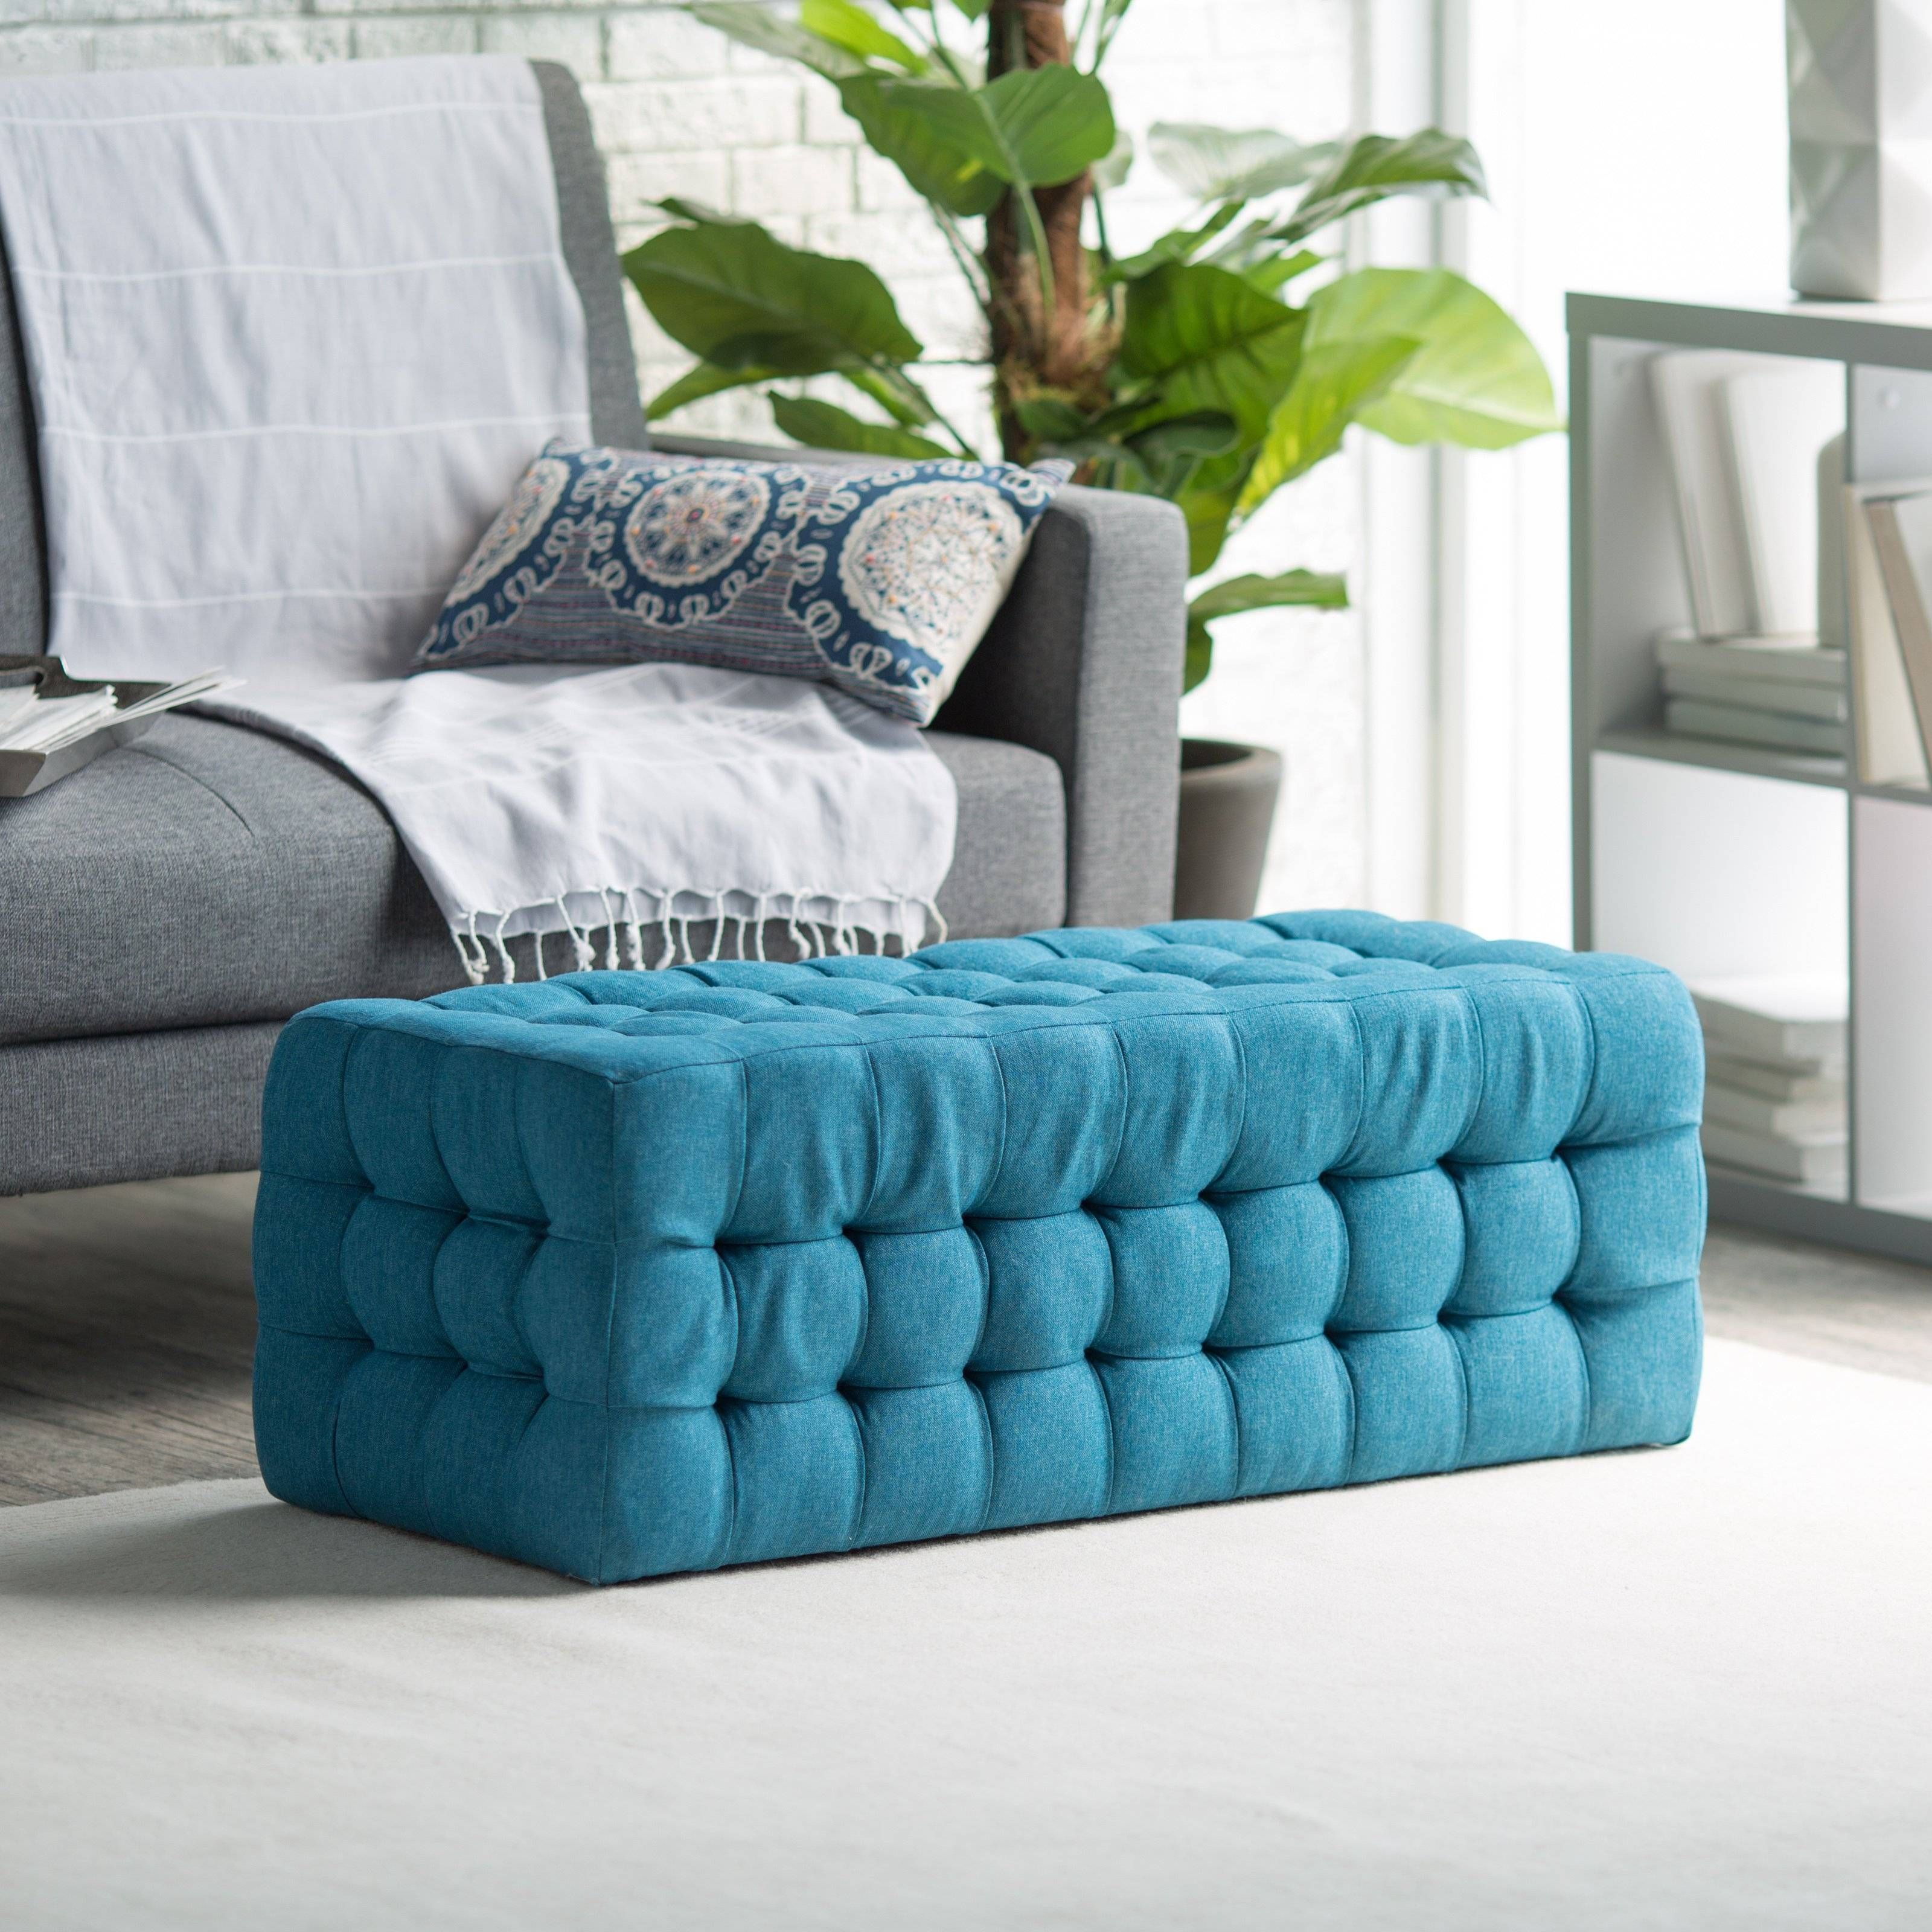 Coffee Tables : Teal Ottoman Coffee Table Shining Teal Ottoman Inside Blue Sofa Tabless (View 15 of 15)